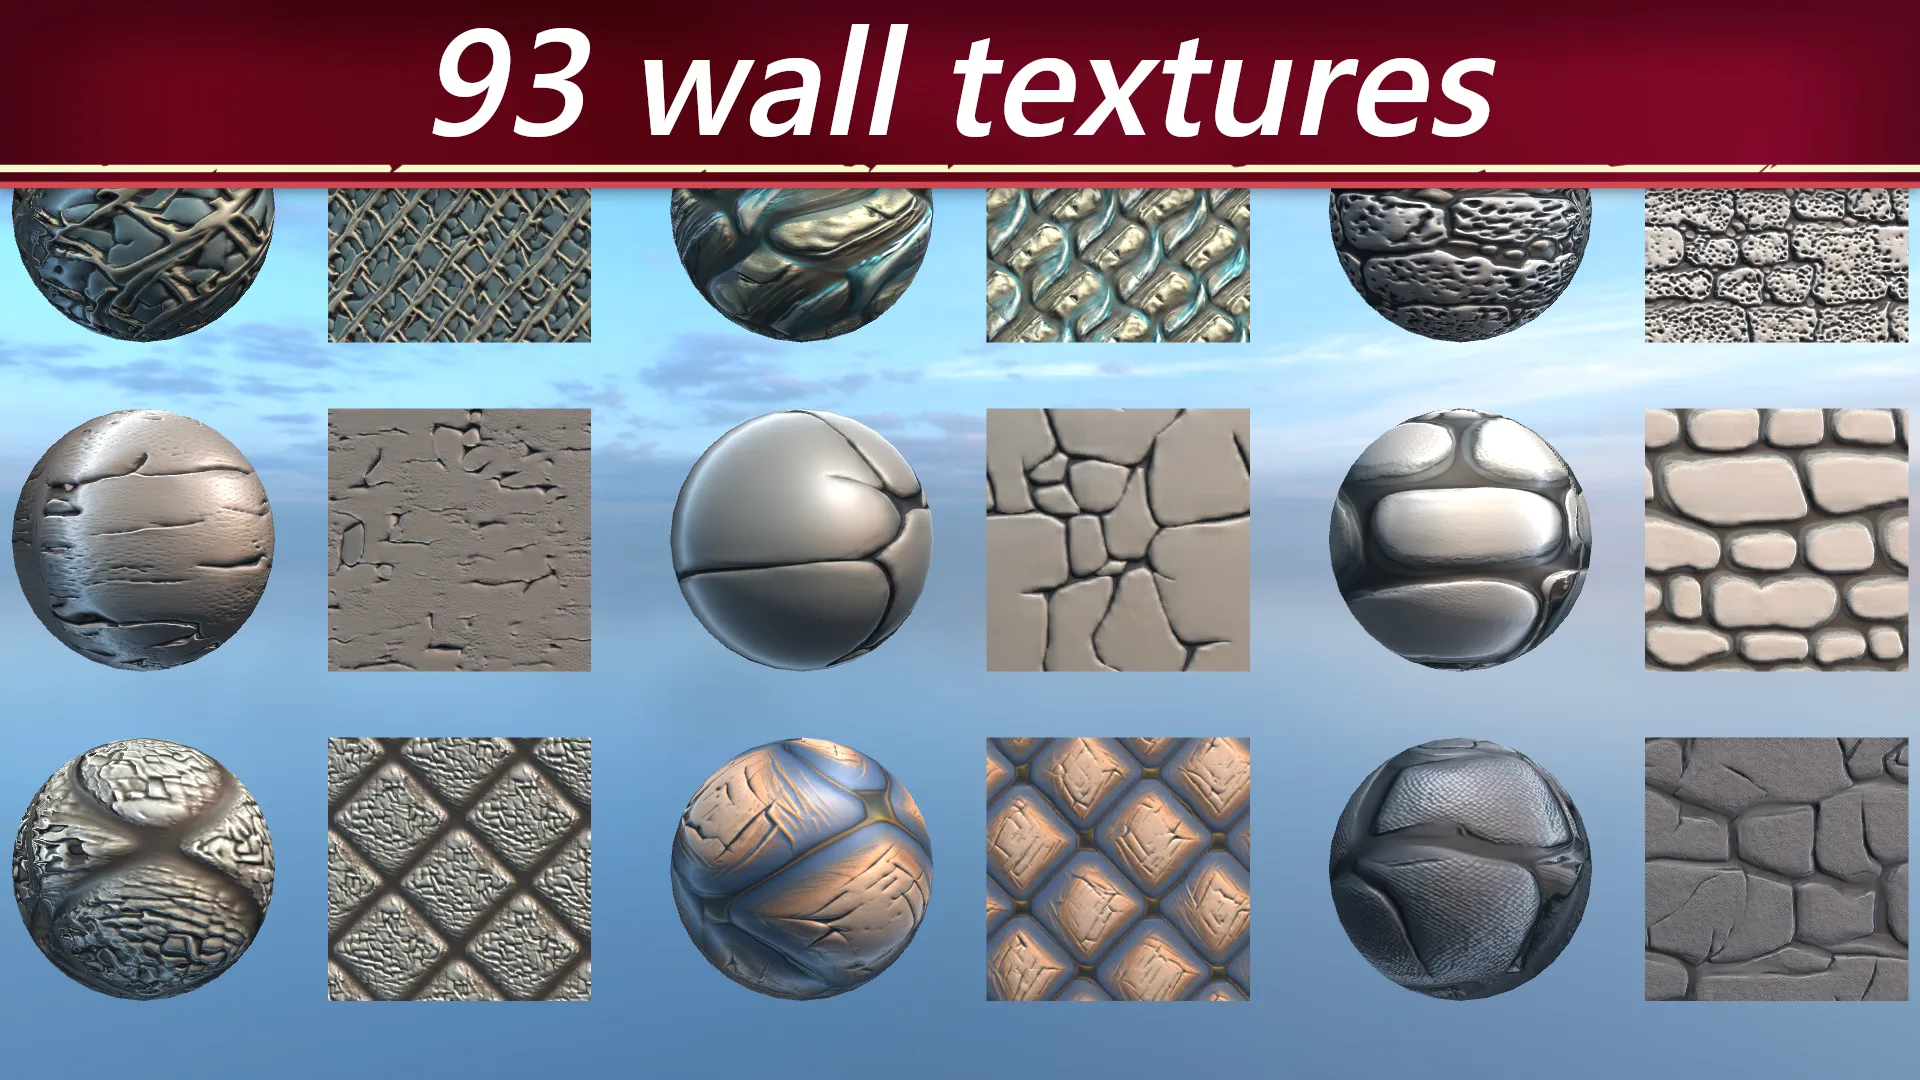 500 Stylized Materials/Texture Sets